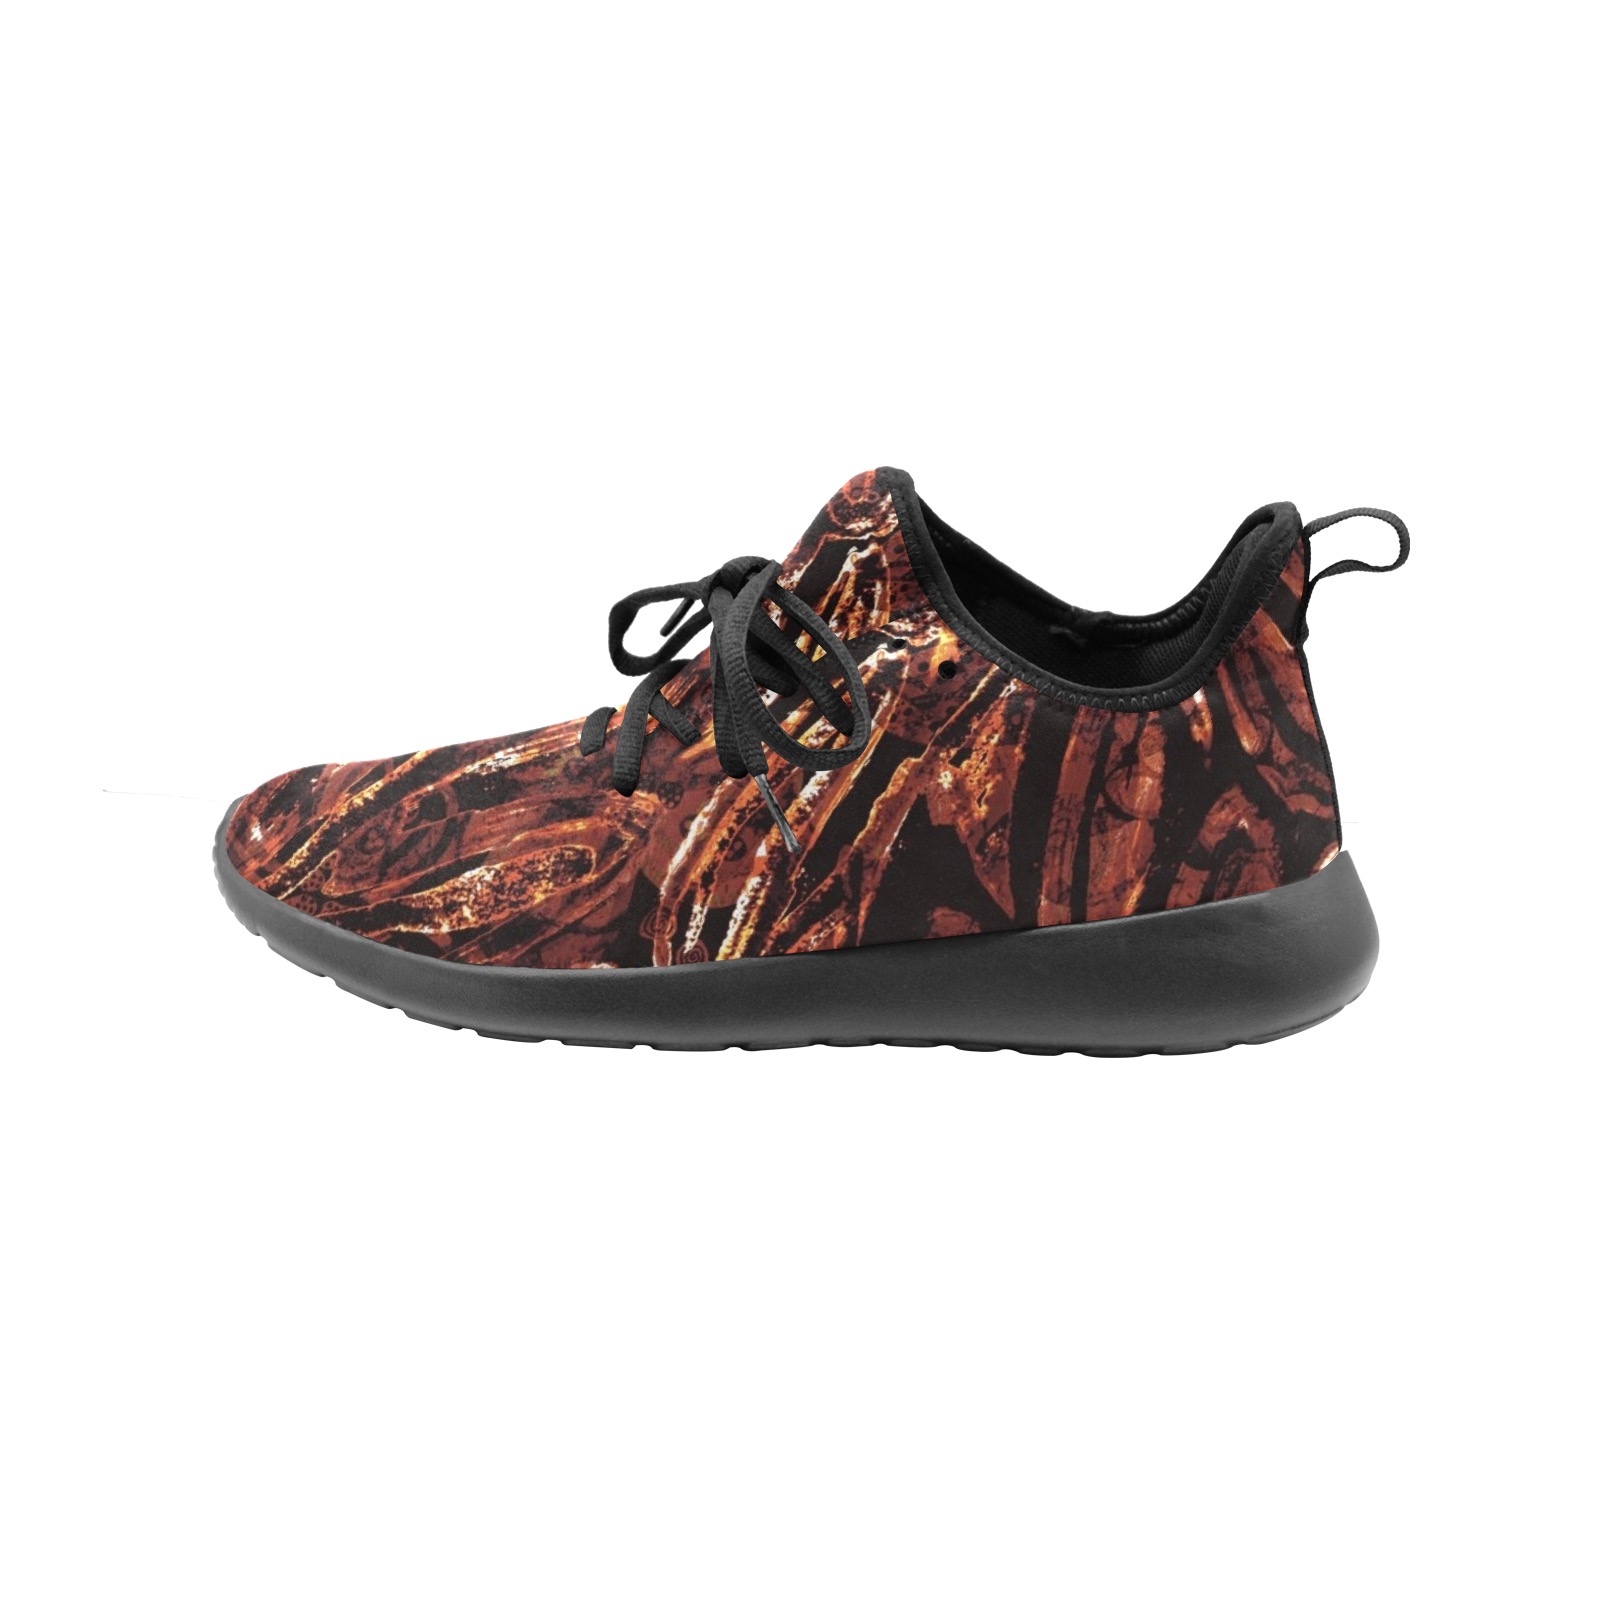 Abstract Style-Golden brown Women's One-Piece Vamp Sneakers (Model 67502)